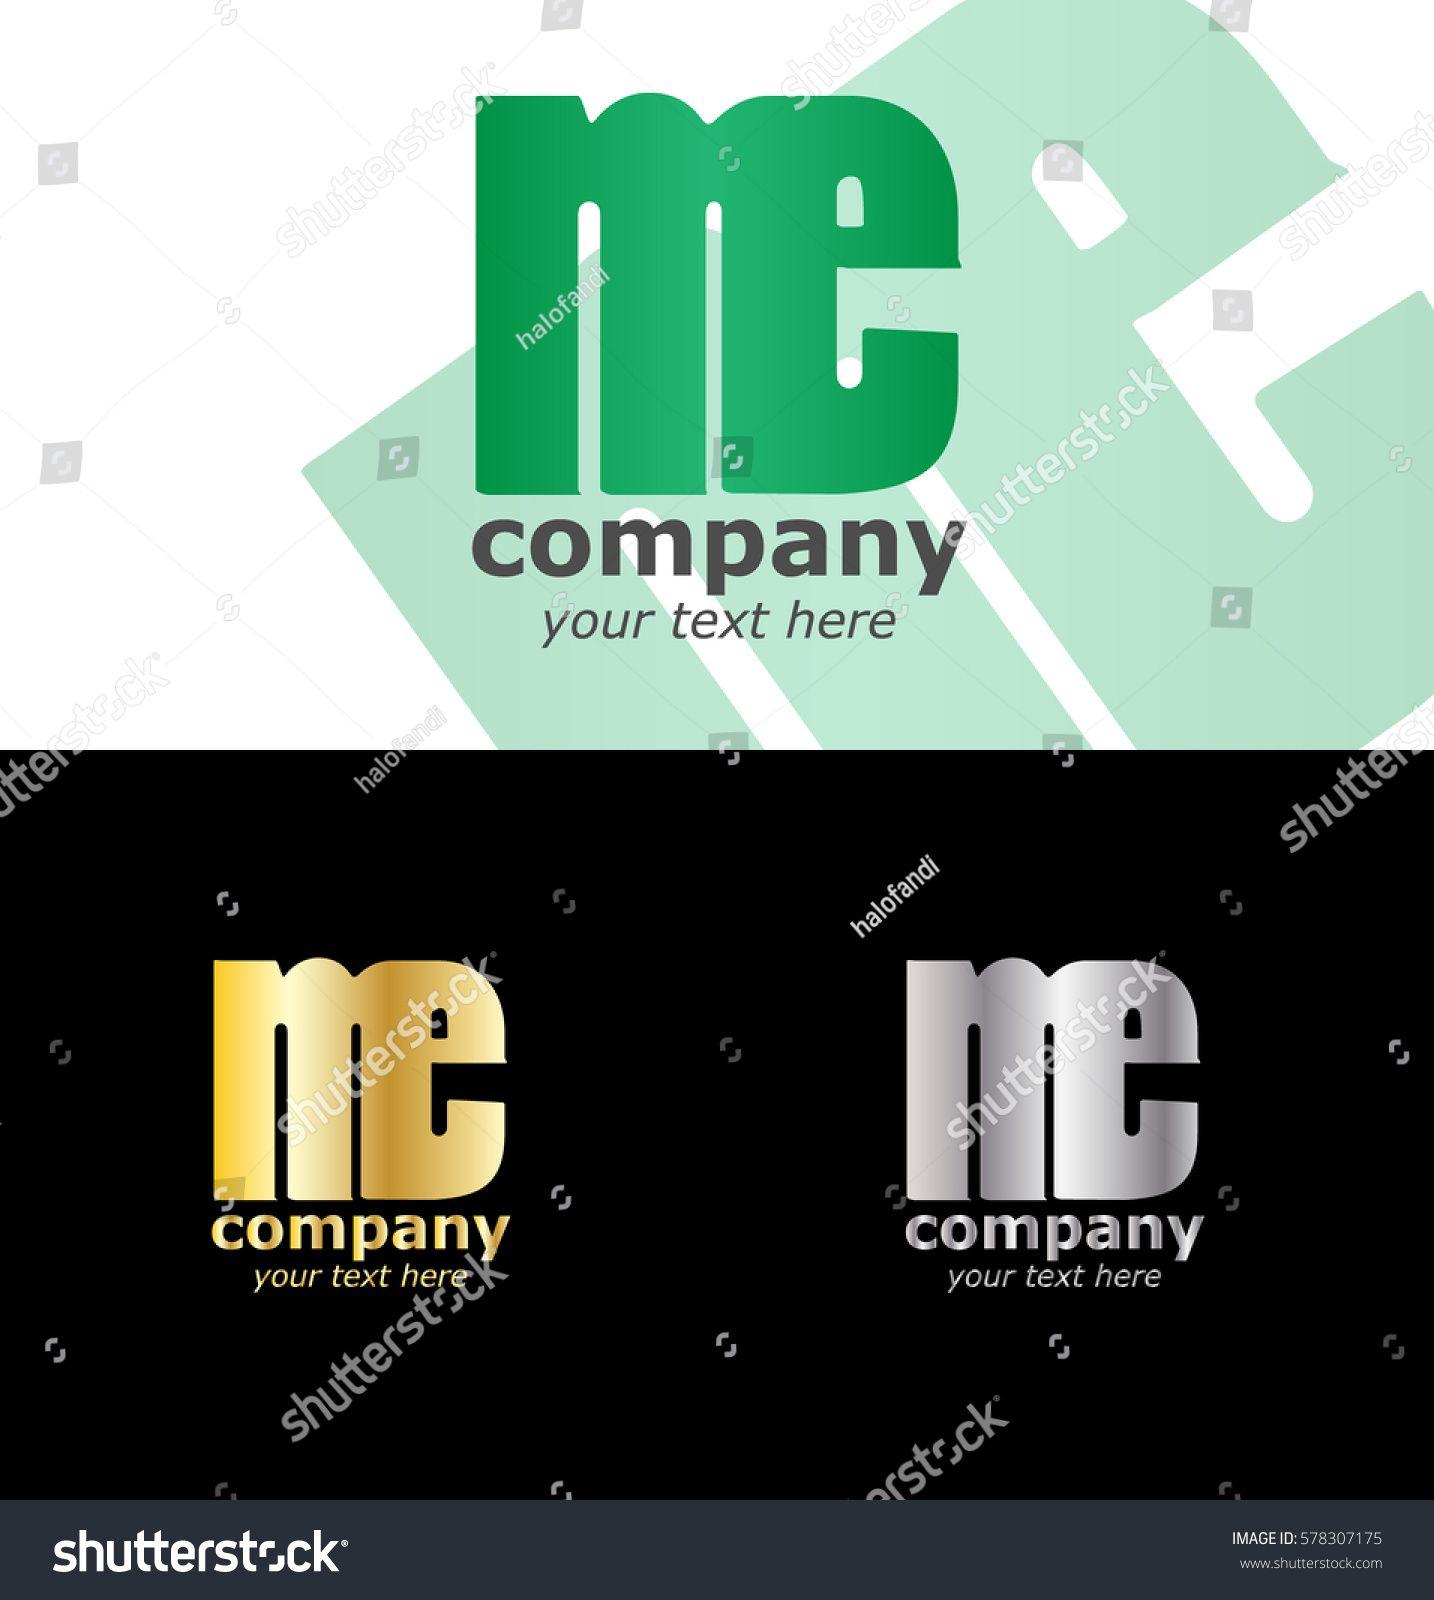 Silver Green Logo - Initial Letter ME NE Logo Design in Green, Gold or Silver Colors ...